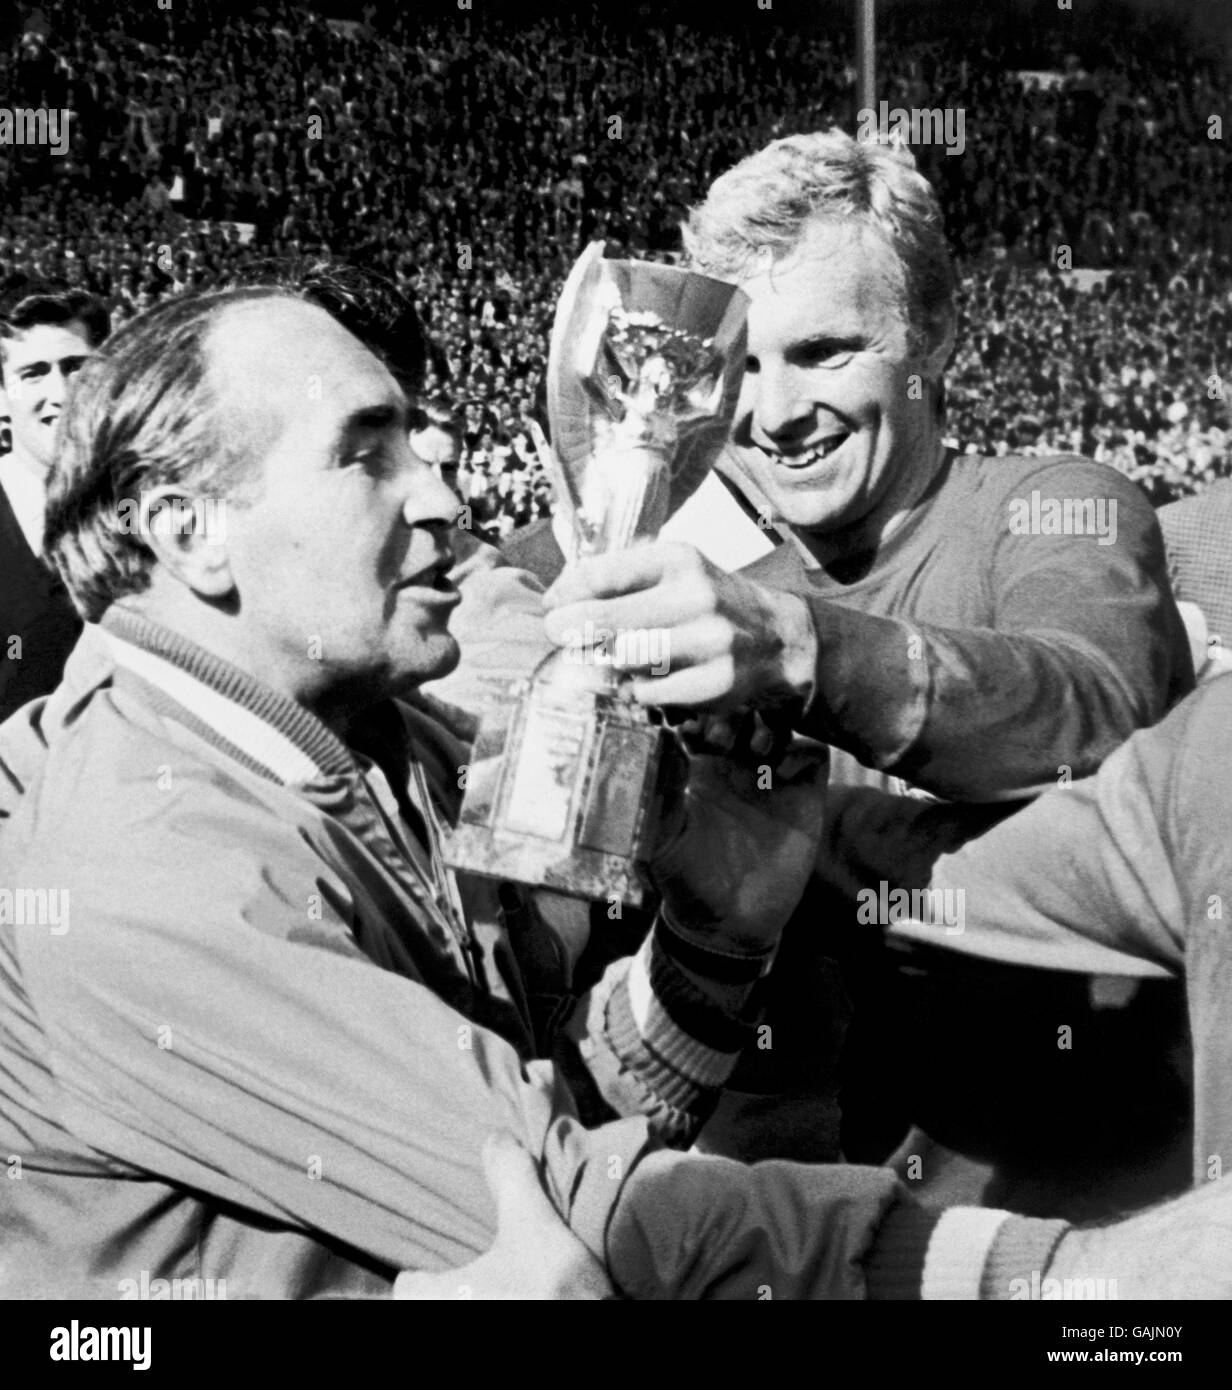 England v West Germany - 1966 World Cup Final - Wembley Stadium. Jubilant England captain Bobby Moore (r) shows the Jules Rimet trophy to manager Alf Ramsey (l) after their 4-2 extra time victory. Stock Photo